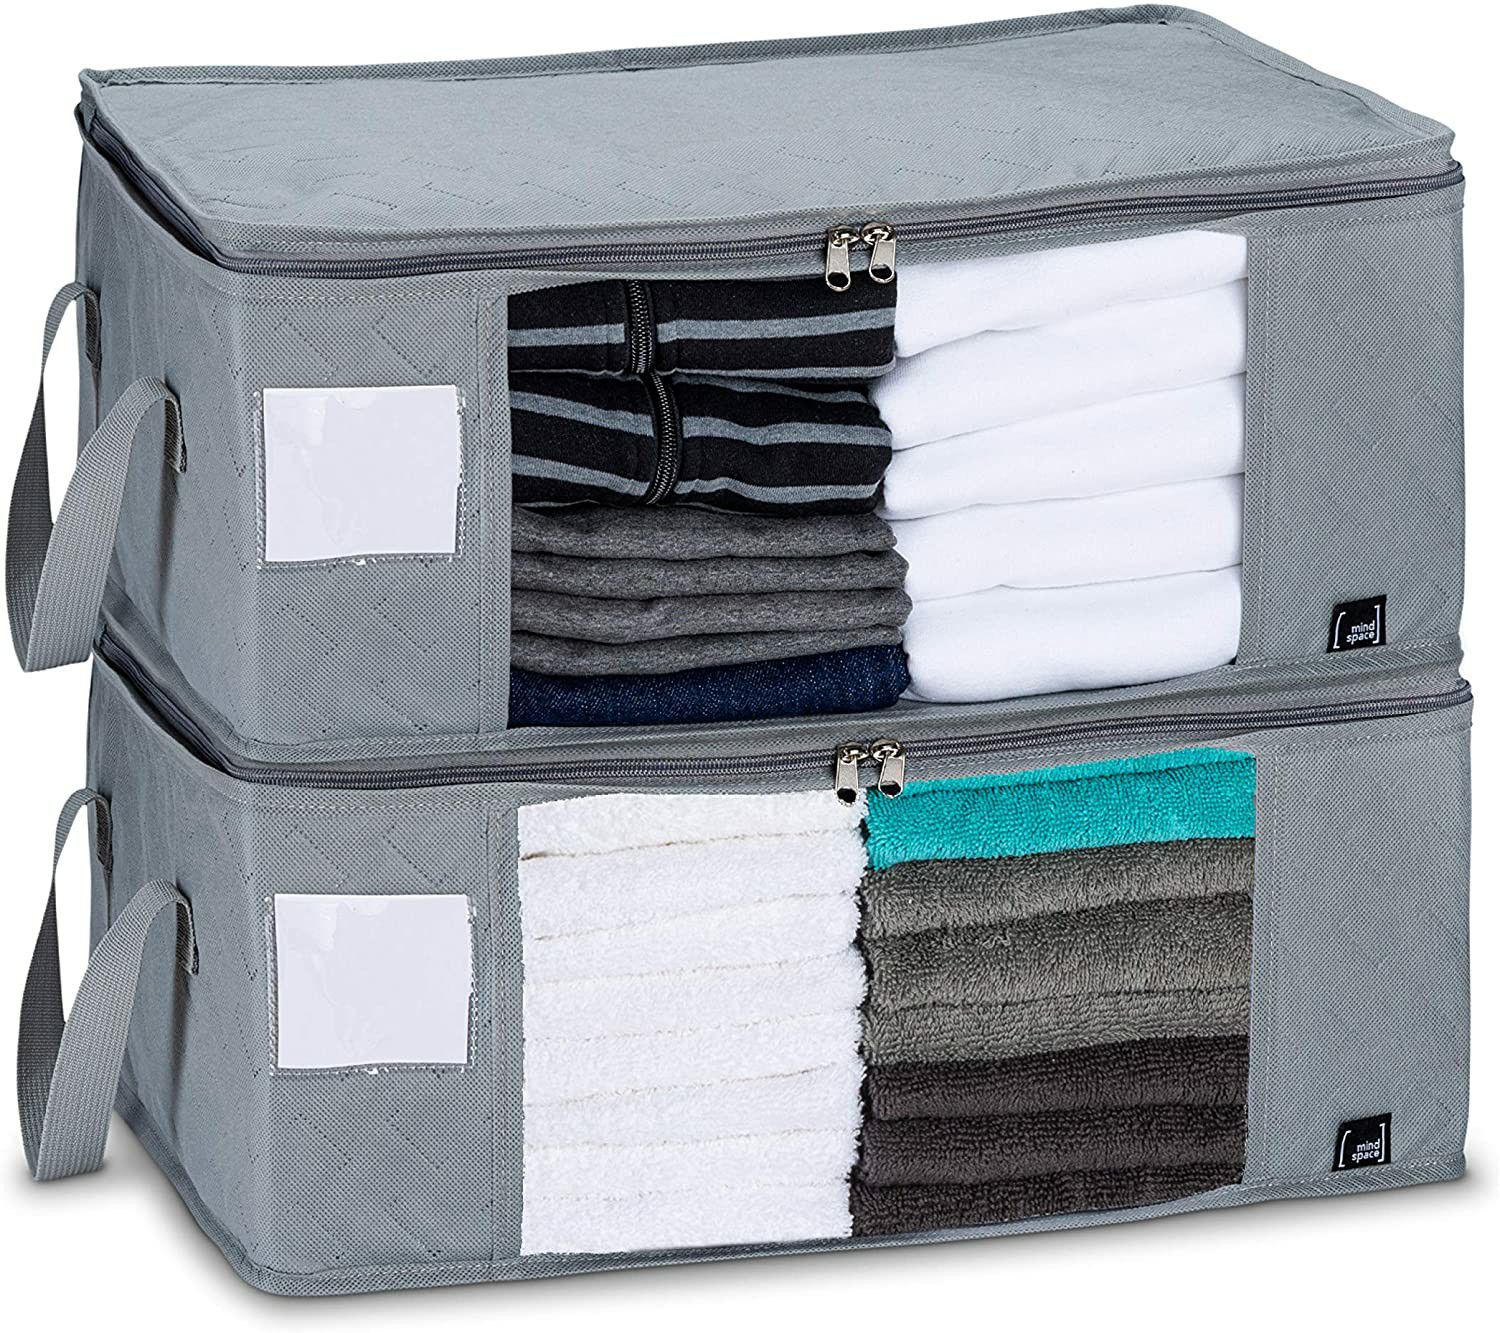 Storage Superior Heavy Duty Clothes Bin Organizer Clear Windows | for Bedroom, Closet Under Bed | 19 x 14 x 8 Inches, Gray